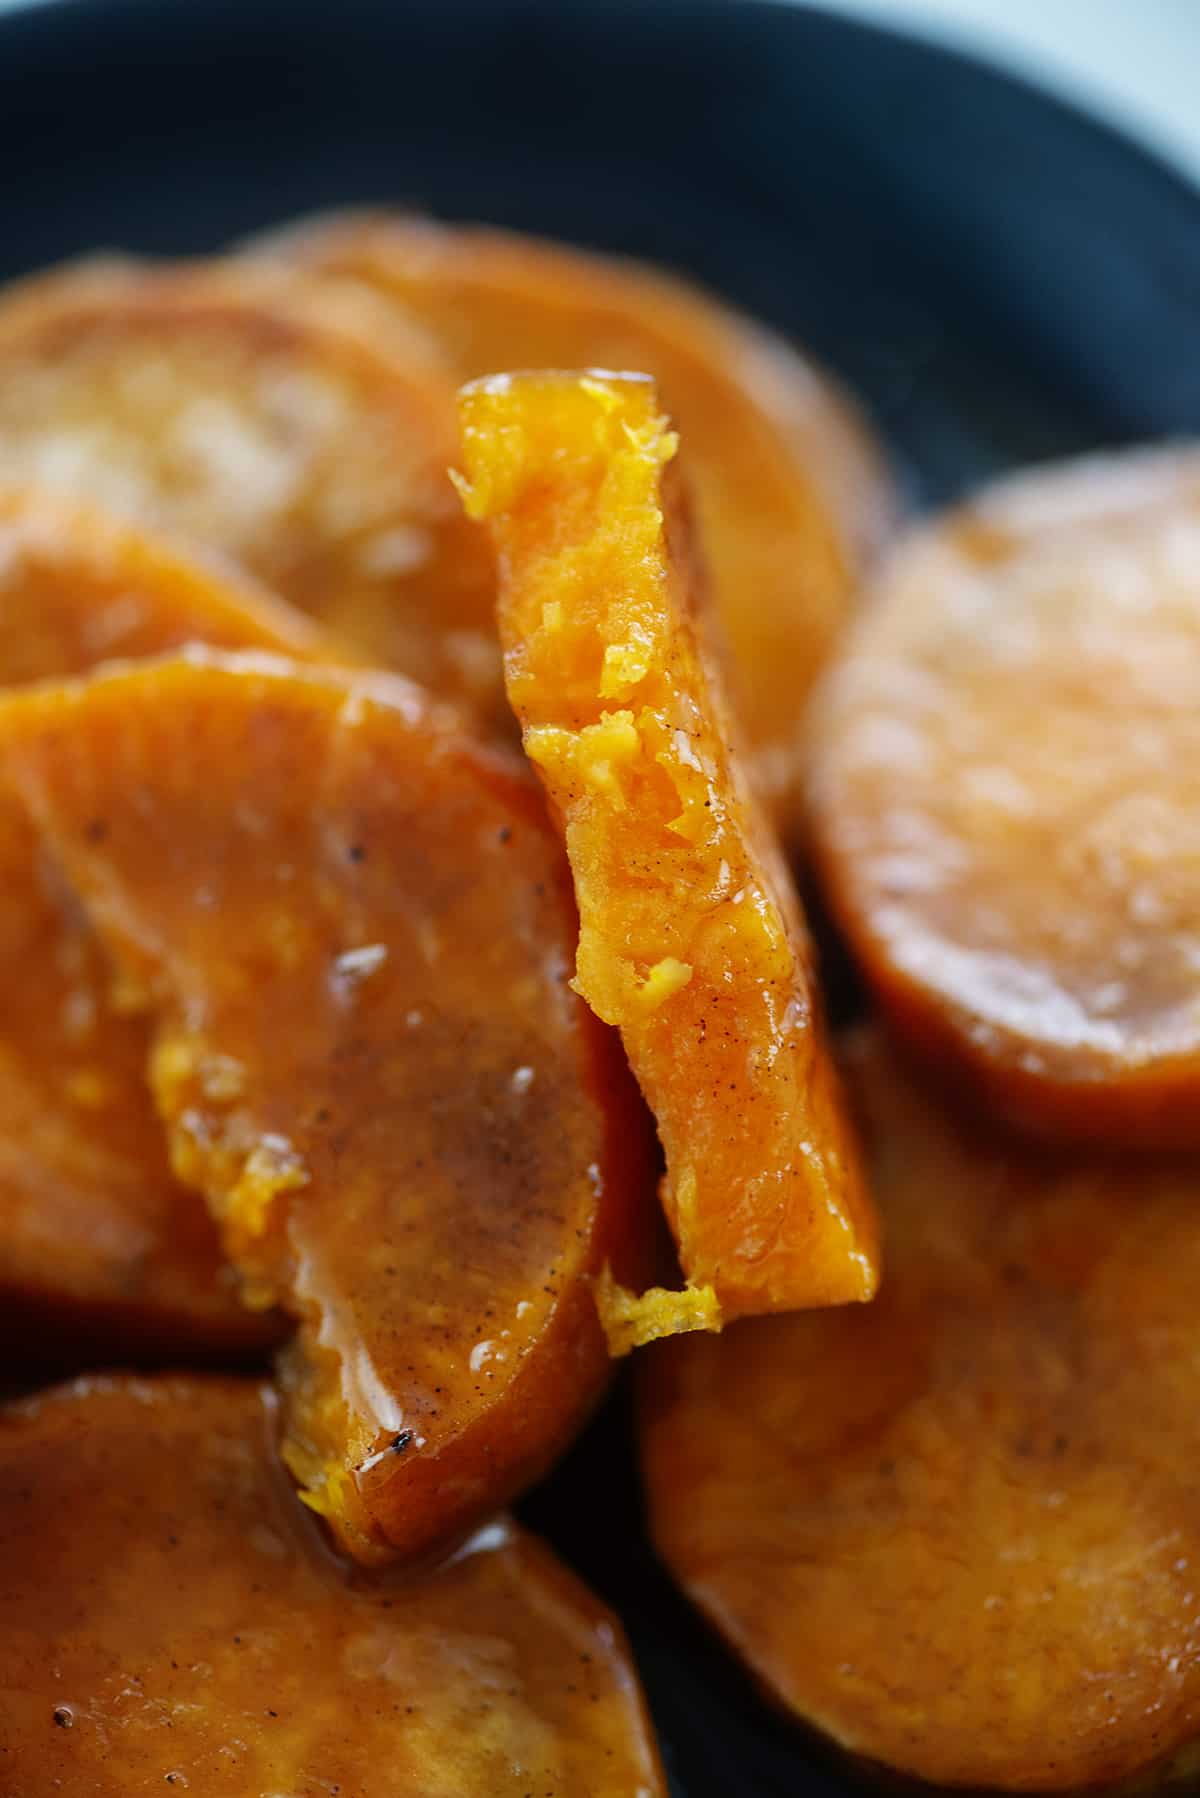 Sliced candied sweet potato on plate.